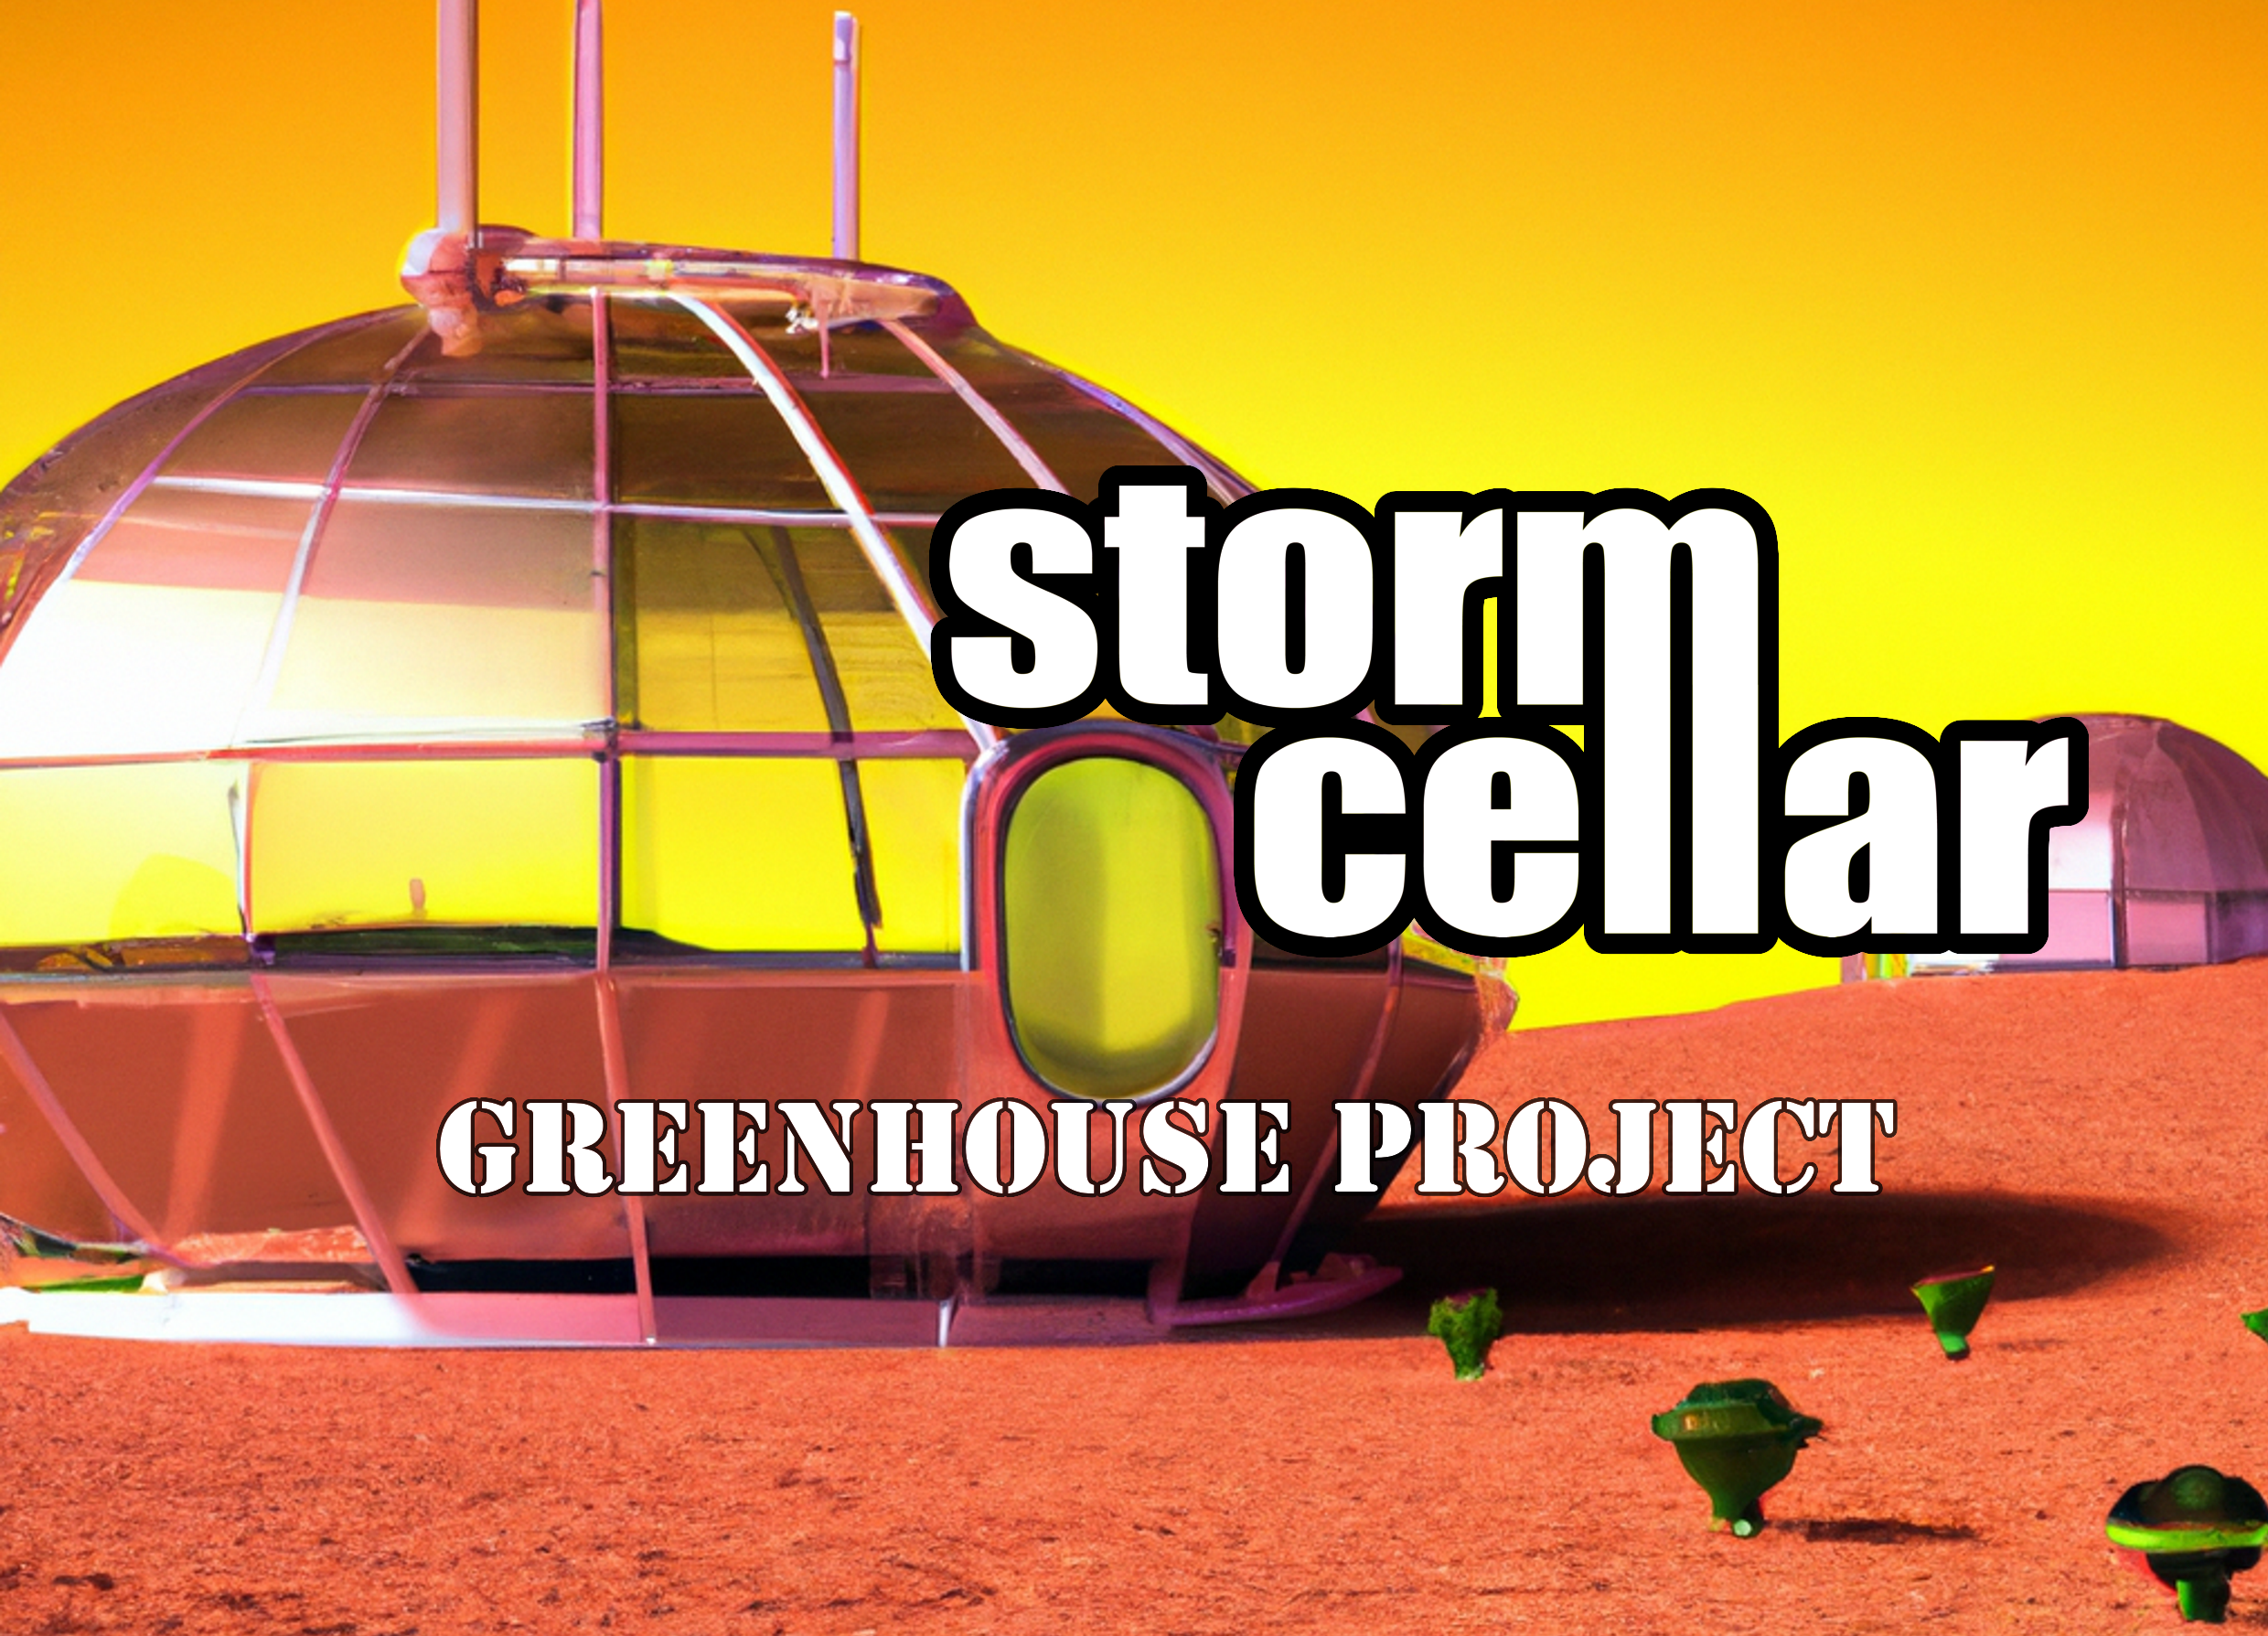 GREENHOUSE_PROJECT_2.png